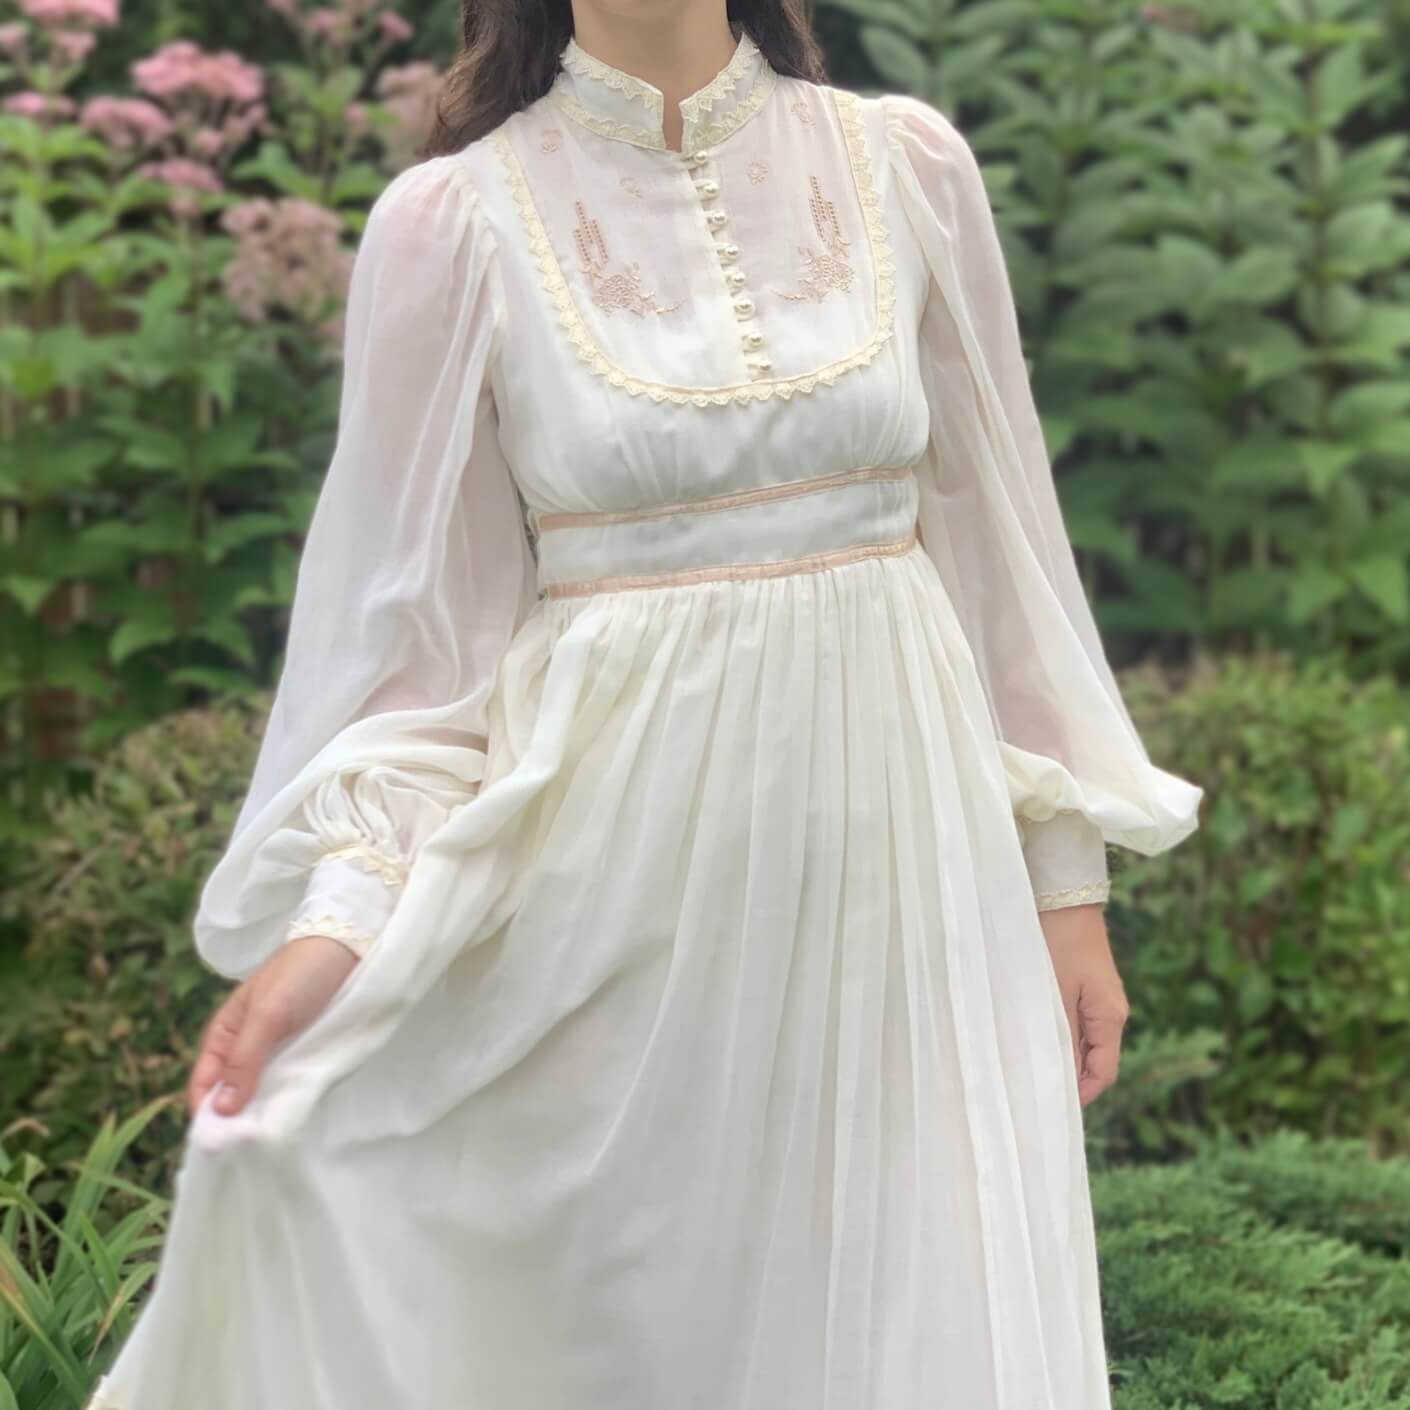 Vintage 1970s Gunne Sax Wedding dress in white cotton with embroidery